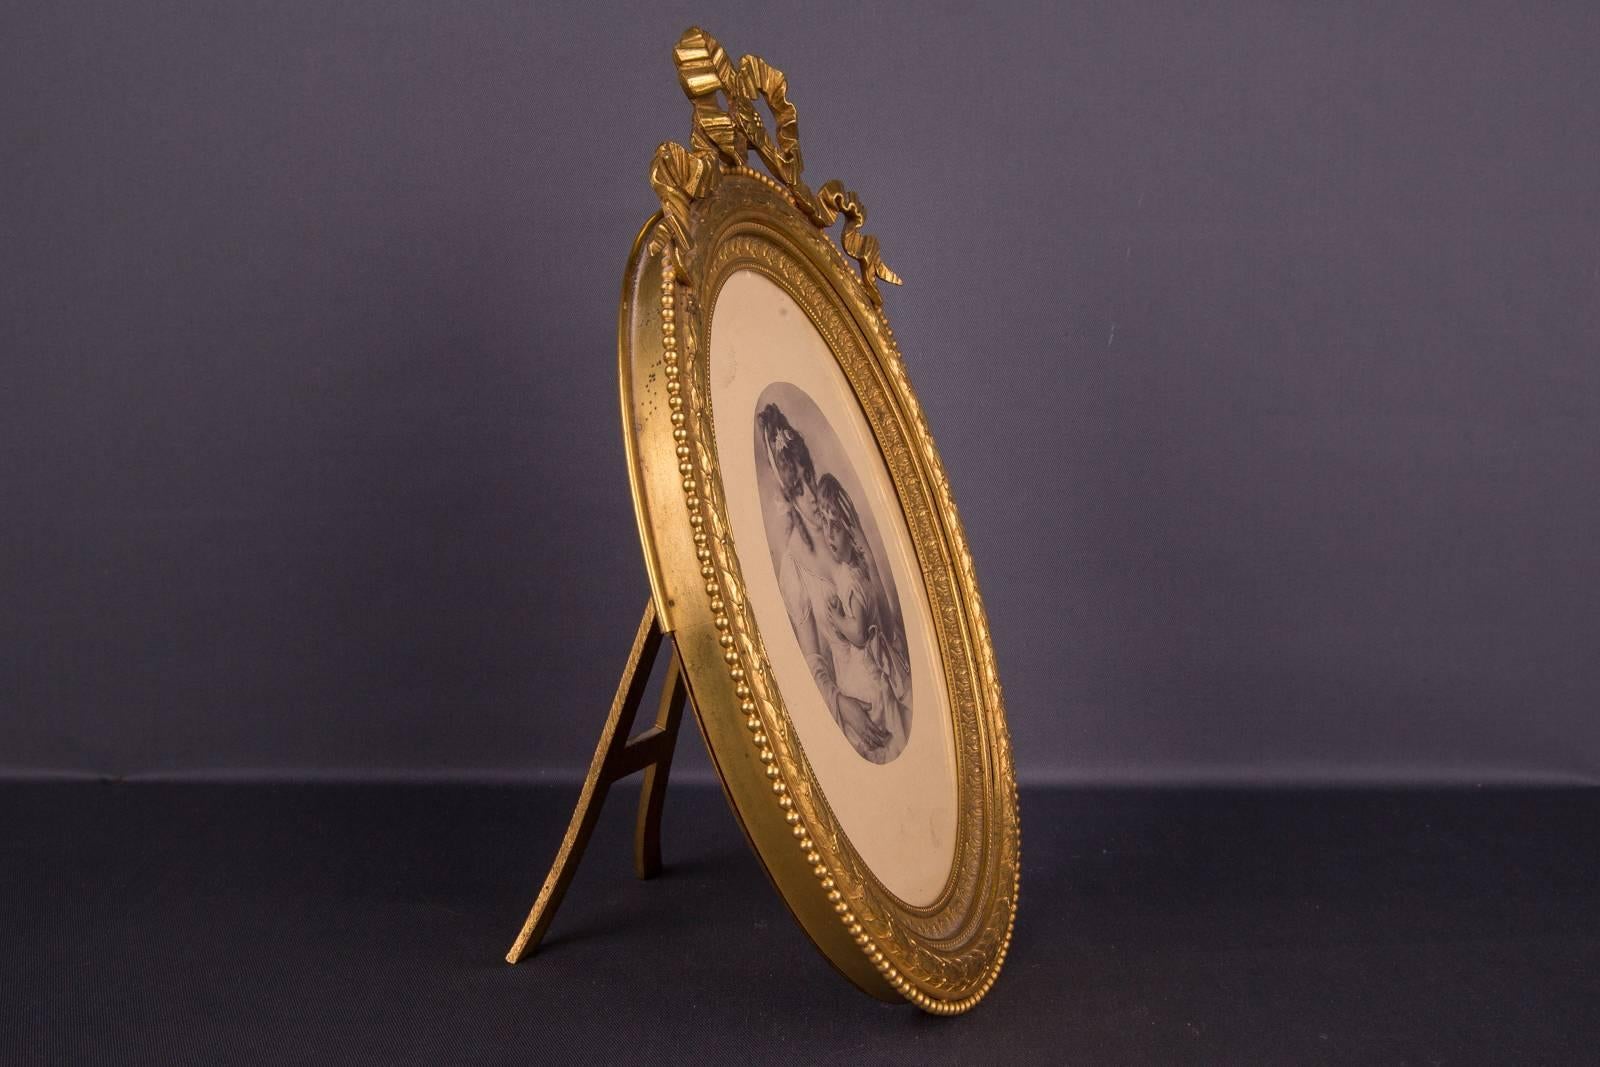 Oval body. Extremely finely chiselled bronze fire gilding. Picture frame, crowned with the typical loops of the Louis Seize. Richly chiselled and profiled edge. Framed with a beaded edge. In the back an A-shaped Stand. Above the frame is an eyelet